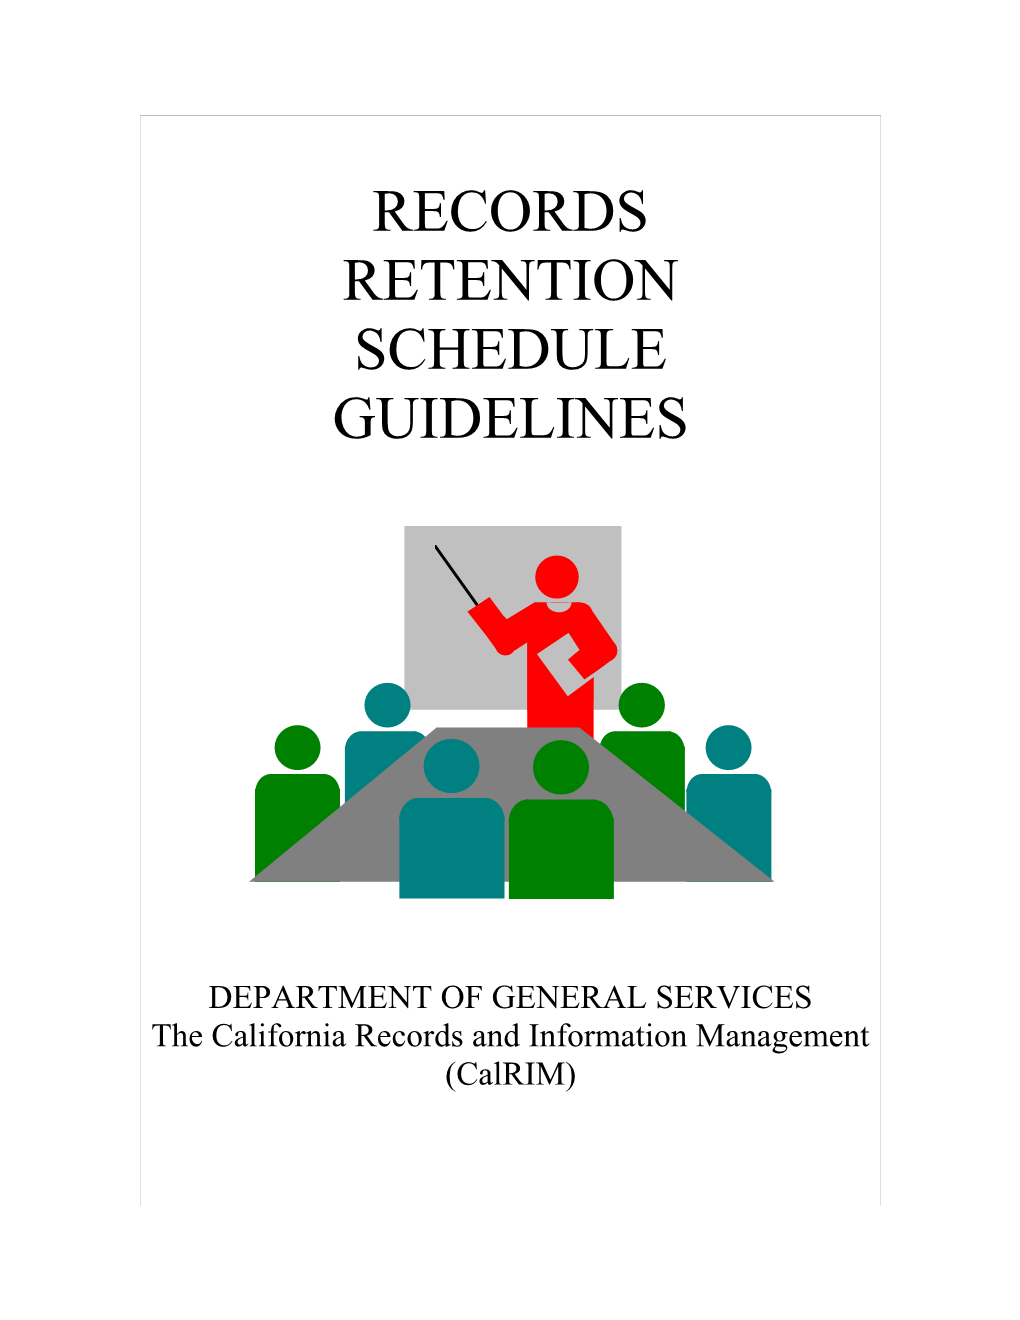 The California Records and Information Management